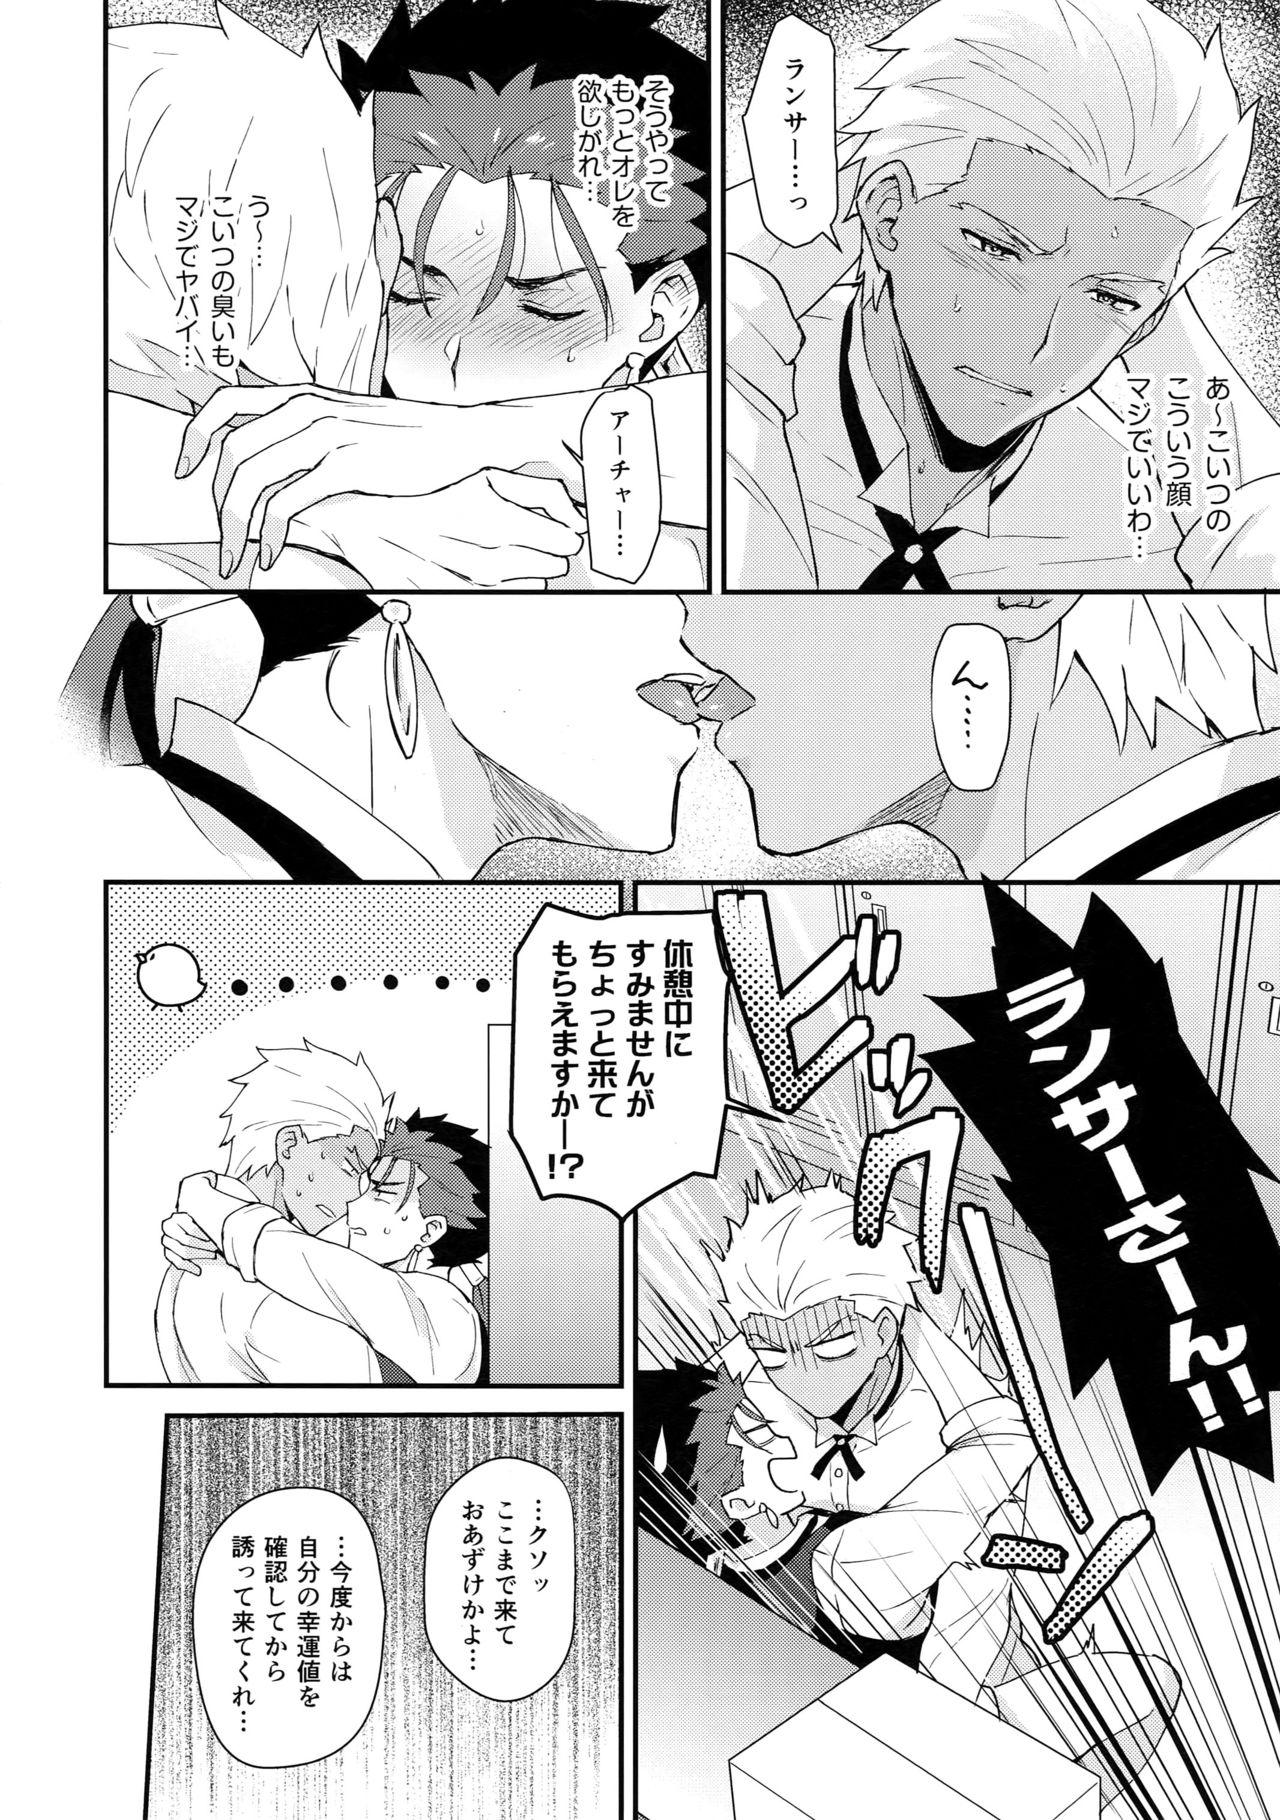 Exotic Cafe Yumiyari - Fate grand order Amatures Gone Wild - Page 7